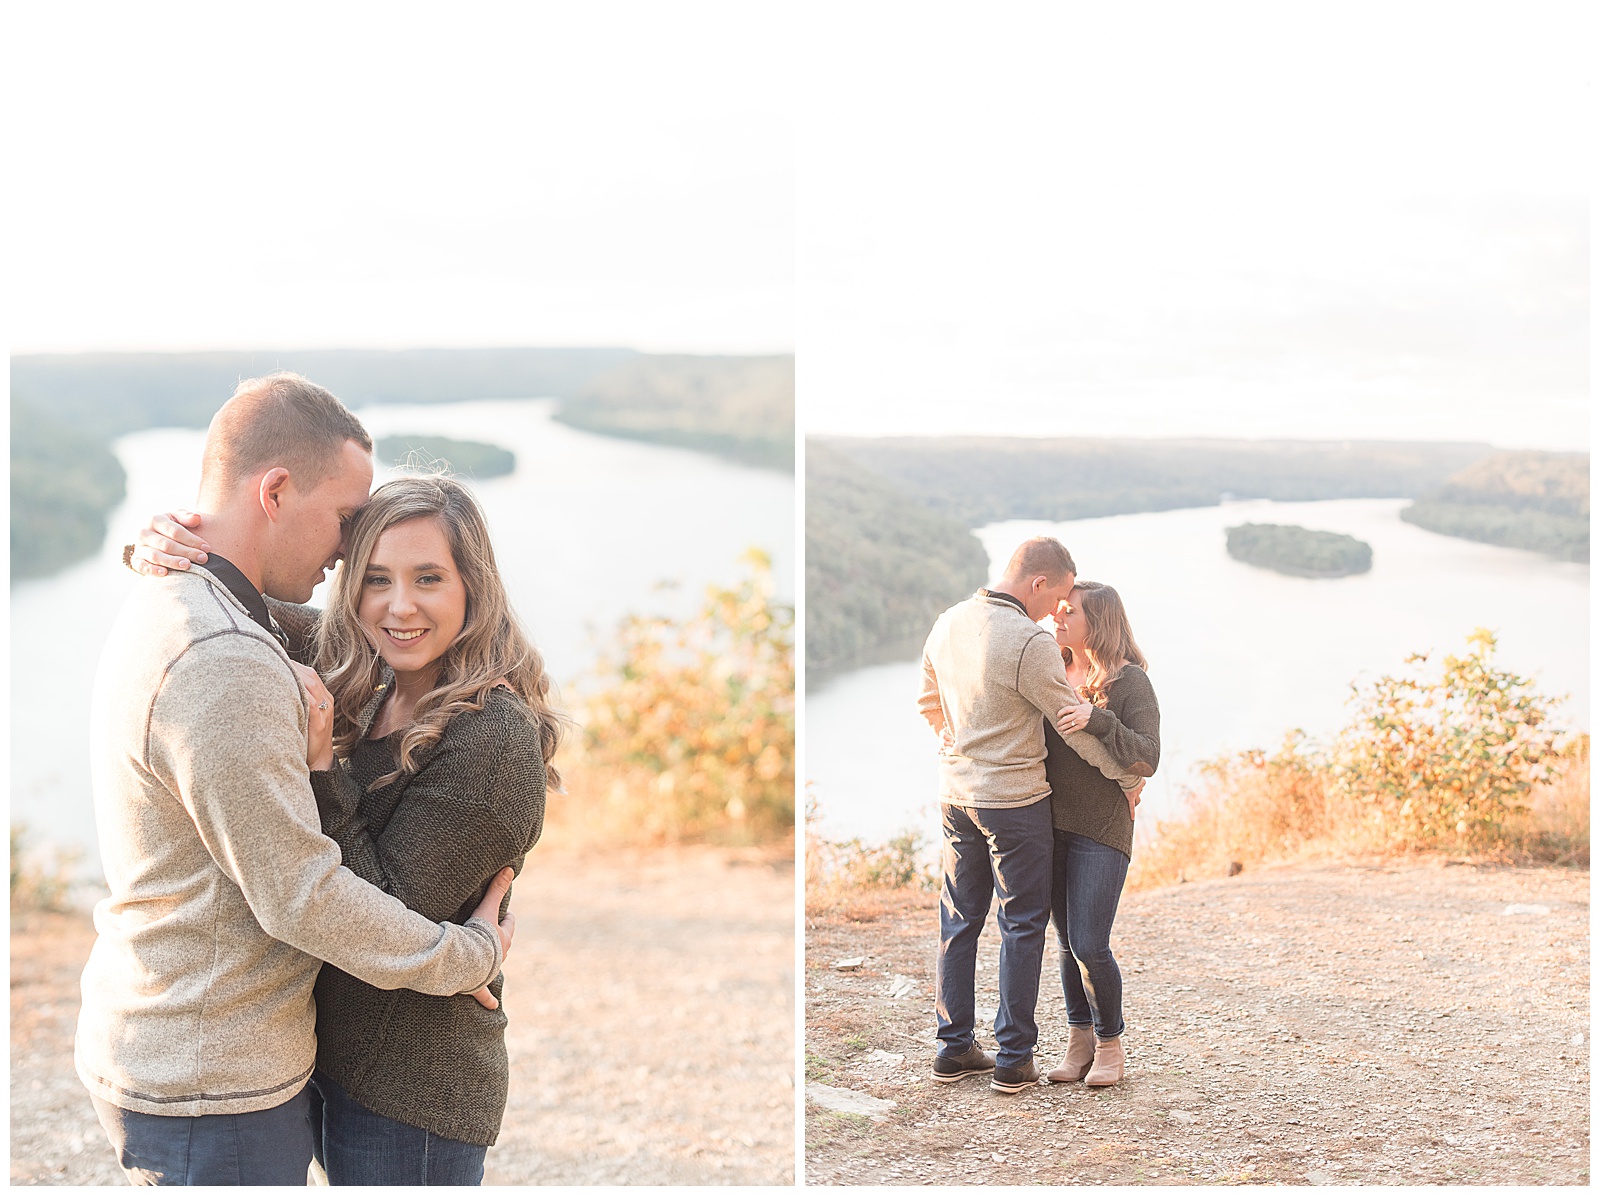 engaged couple hugging as girl smiles and looks at camera with the couple wearing sweaters and jeans on fall day